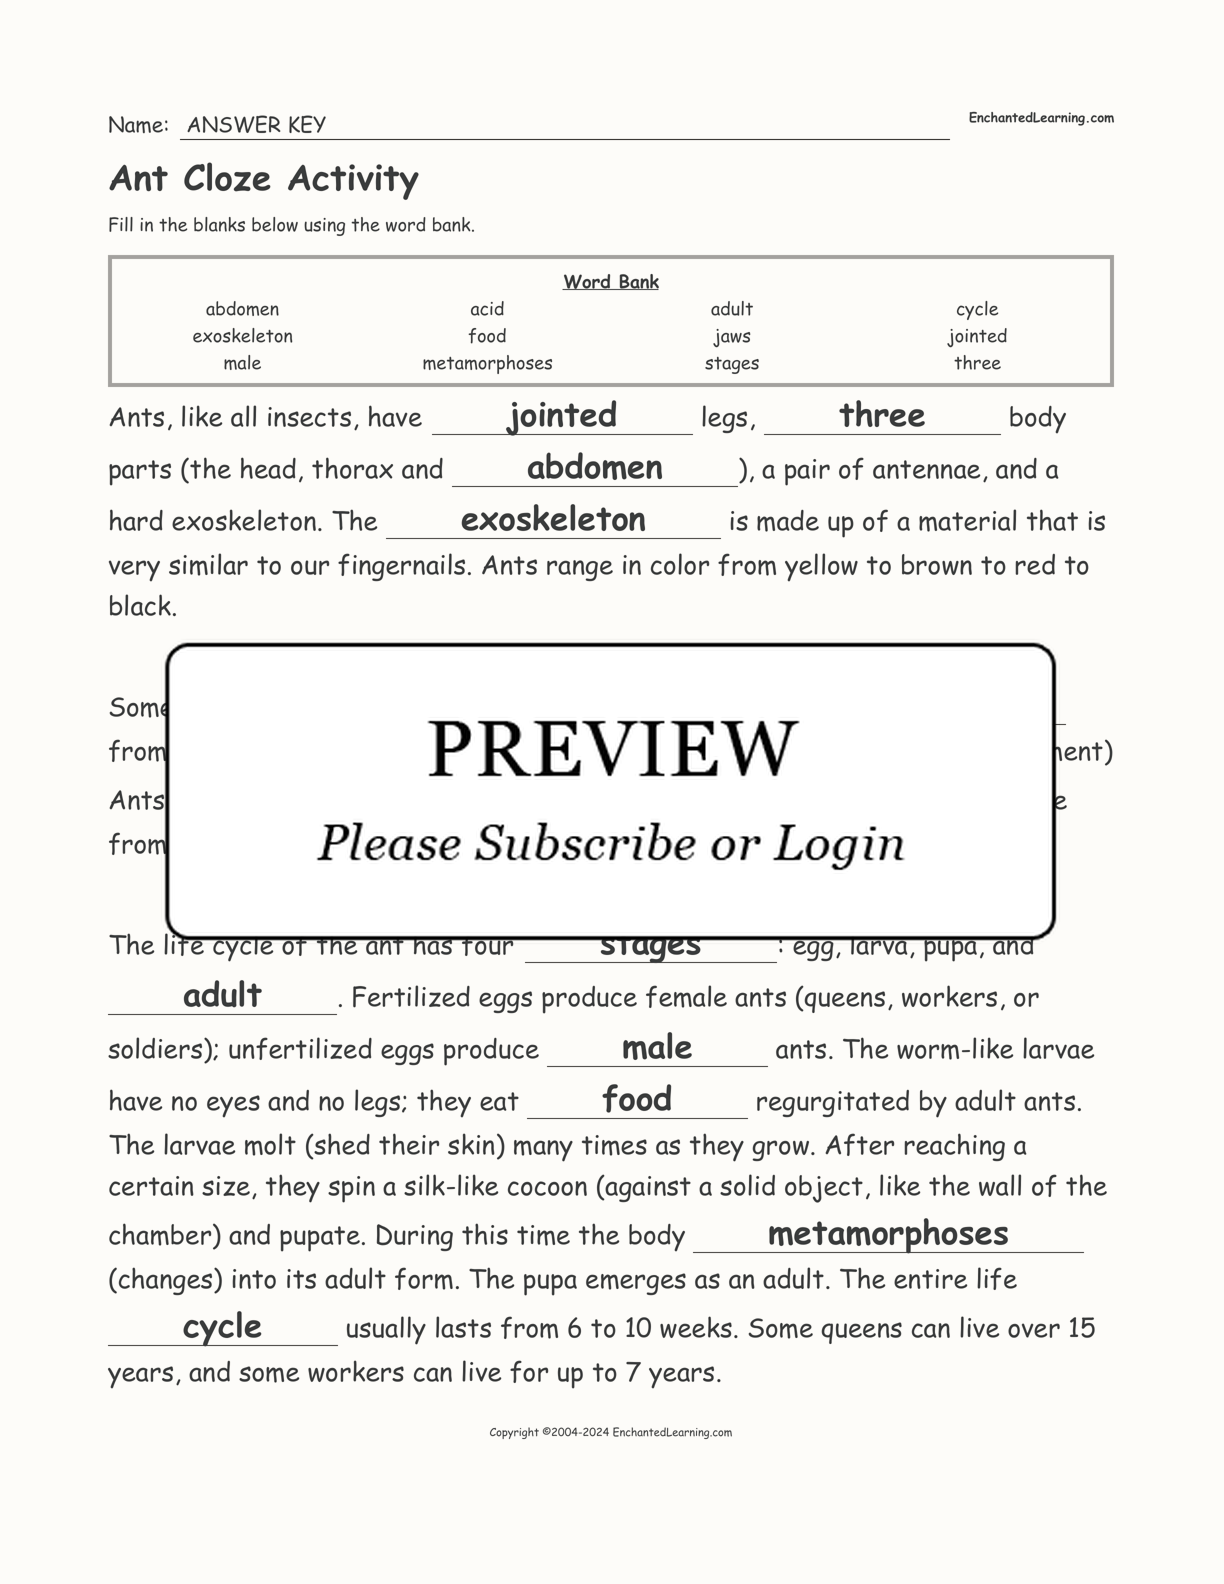 Ant Cloze Activity interactive worksheet page 2